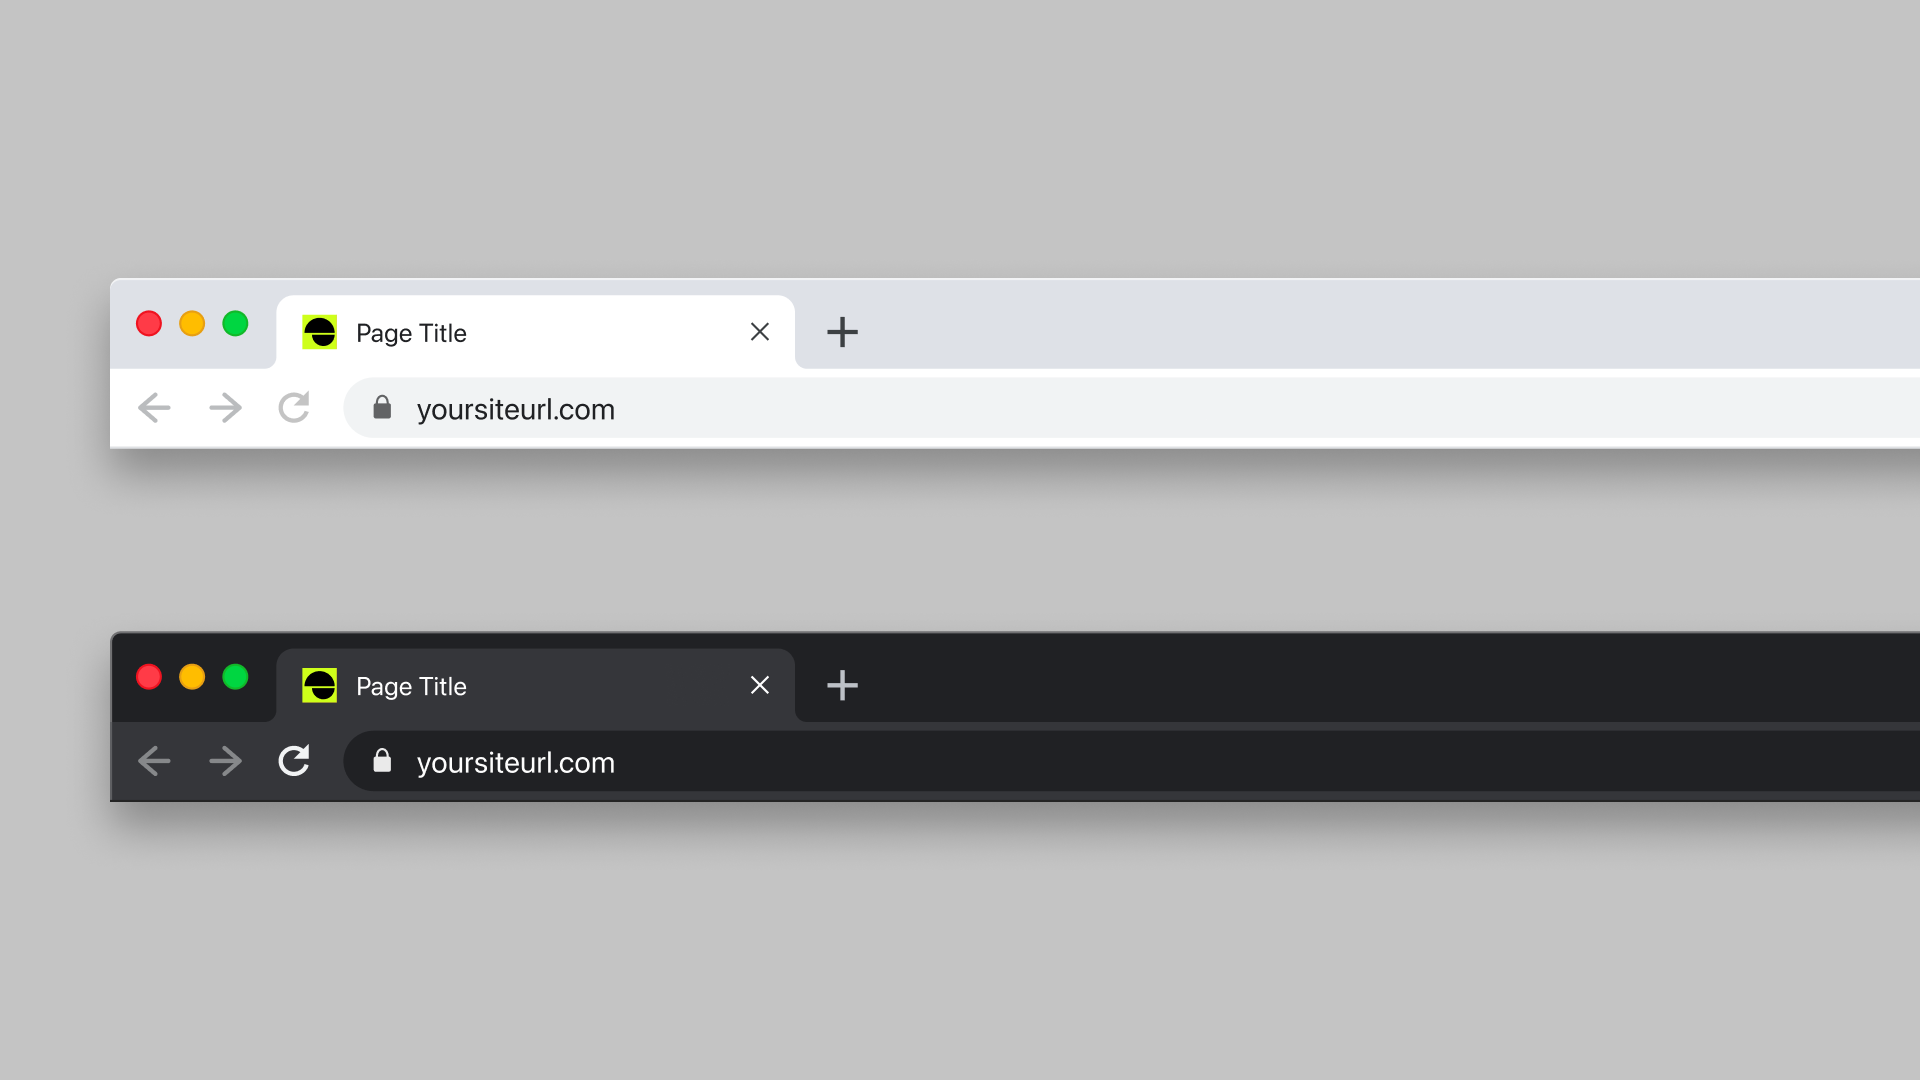 The view of navigation bar on the website with open Dodonut page and its favicon 